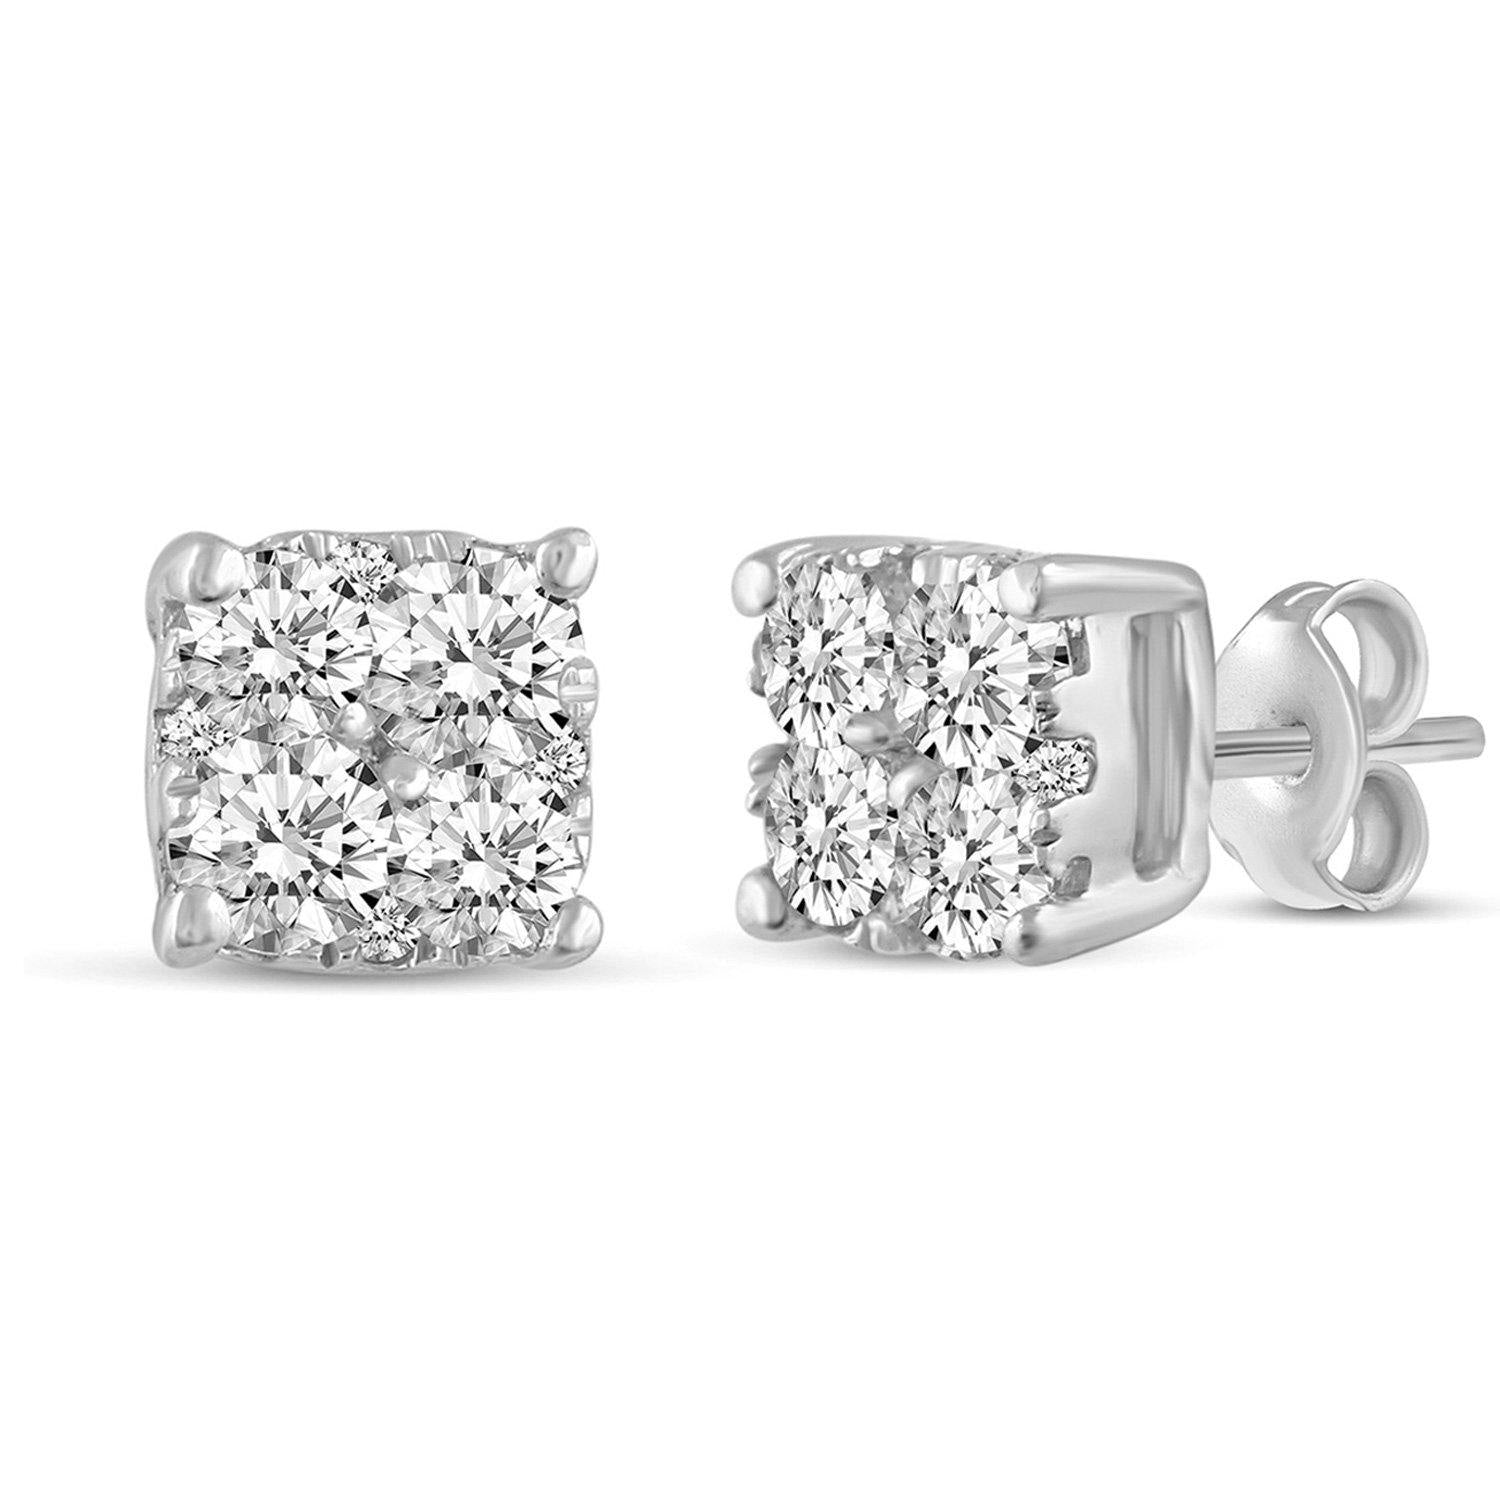 1/4 - 1 1/2 Cttw Cushion Diamond Stud Earrings set in 925 Sterling Silver - Fifth and Fine